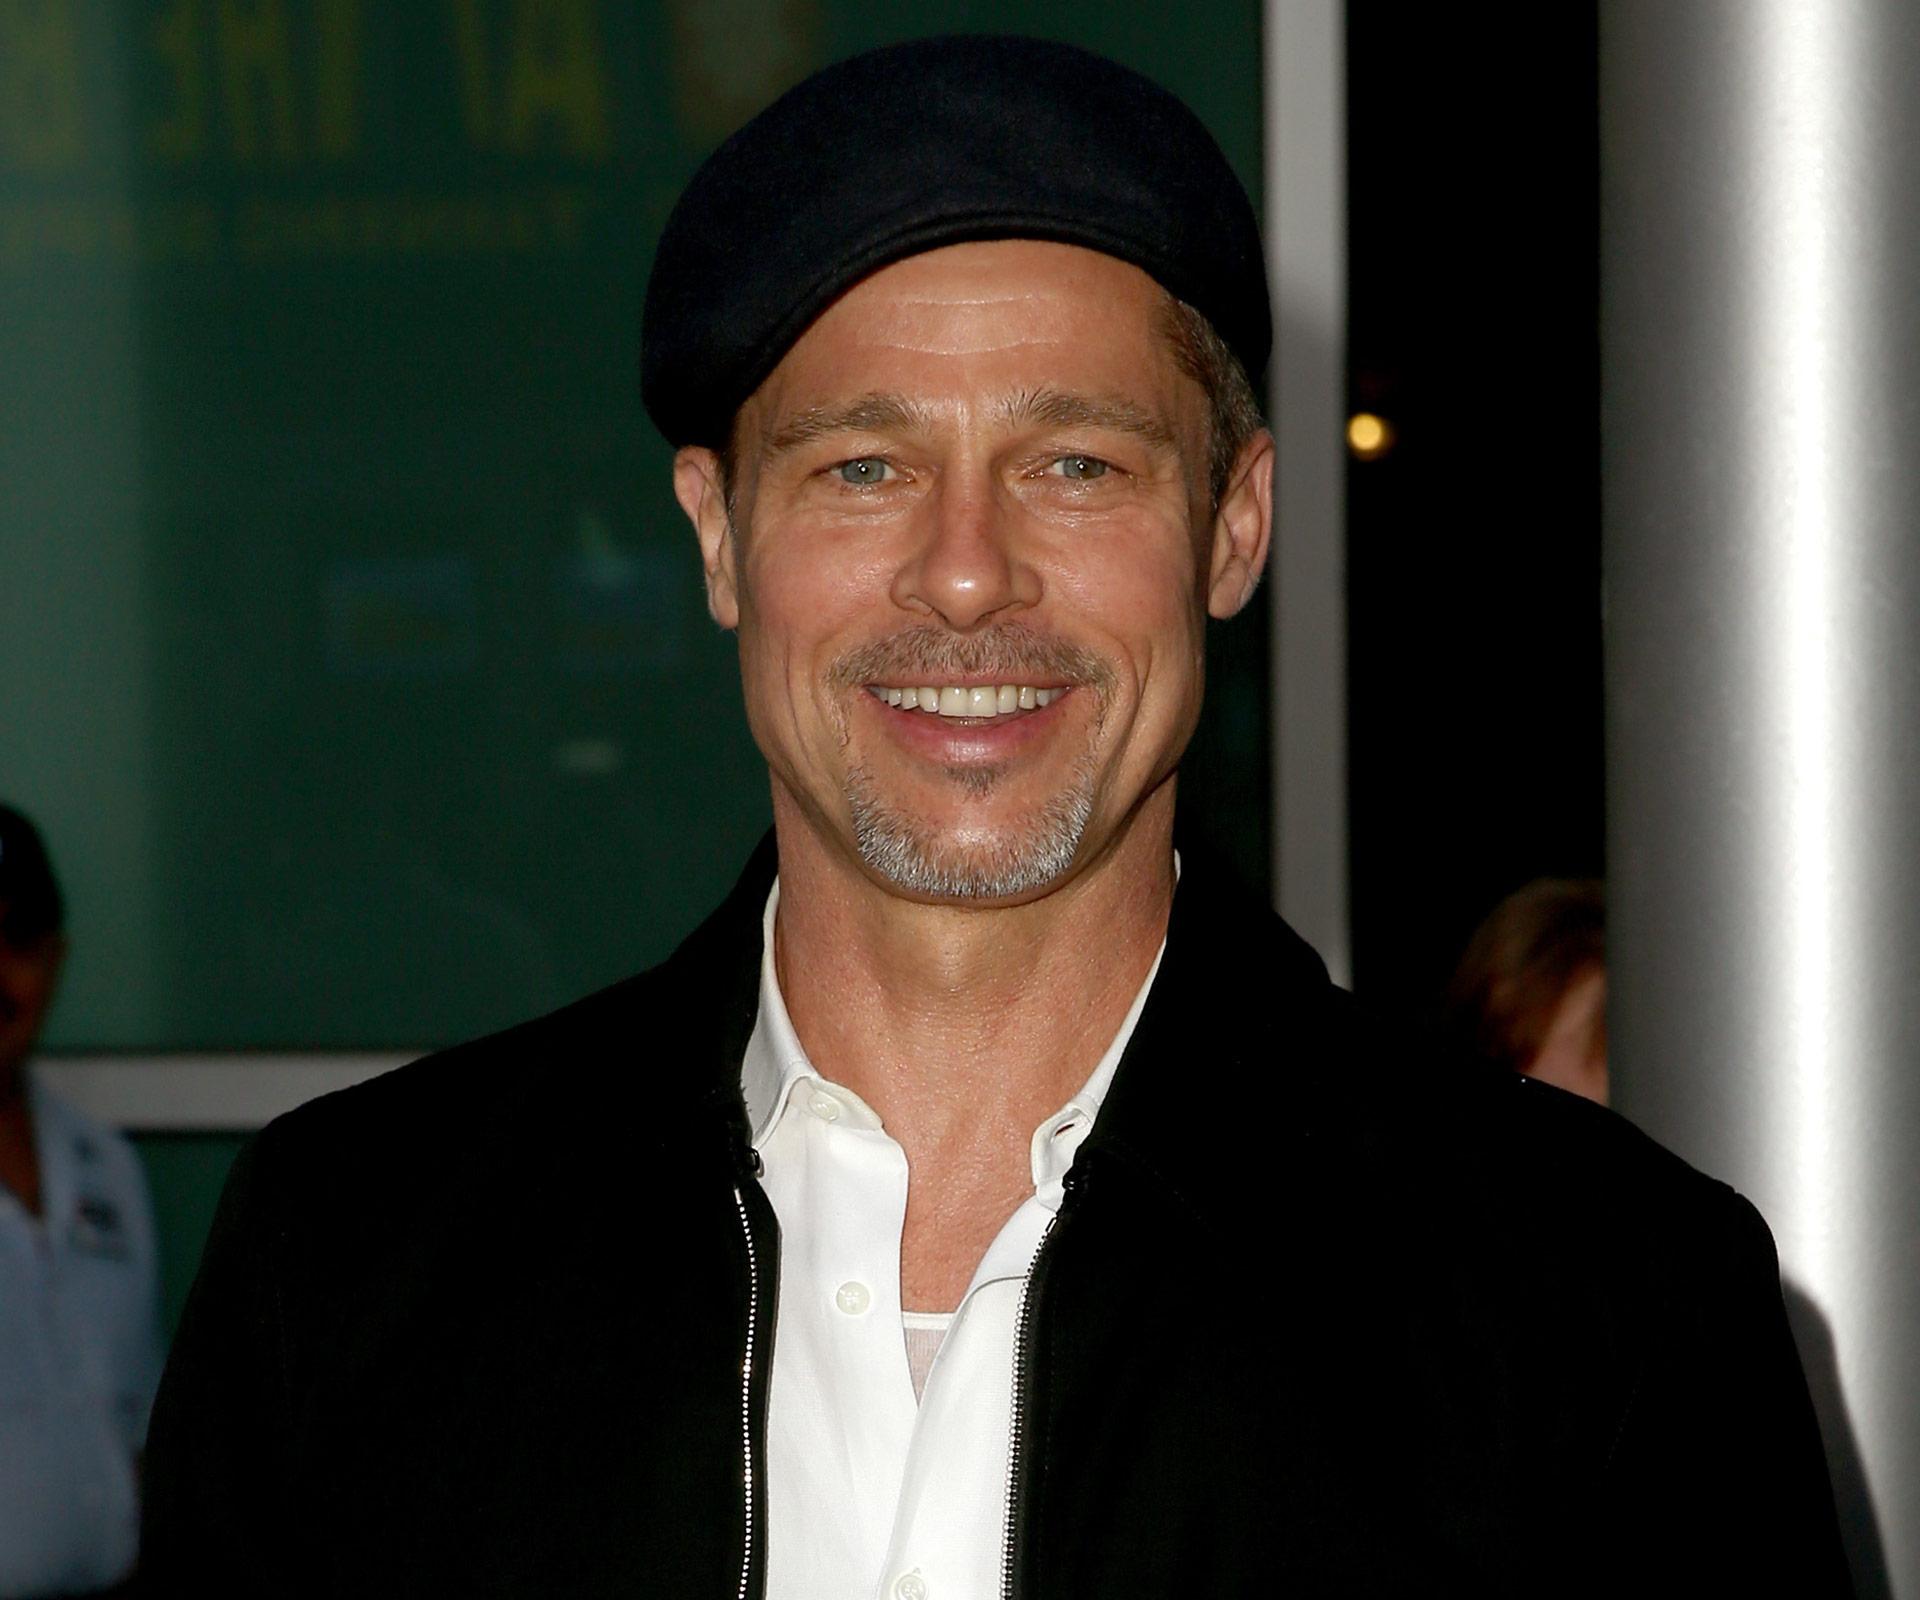 Brad Pitt has stopped drinking and started therapy after split from Angelina Jolie